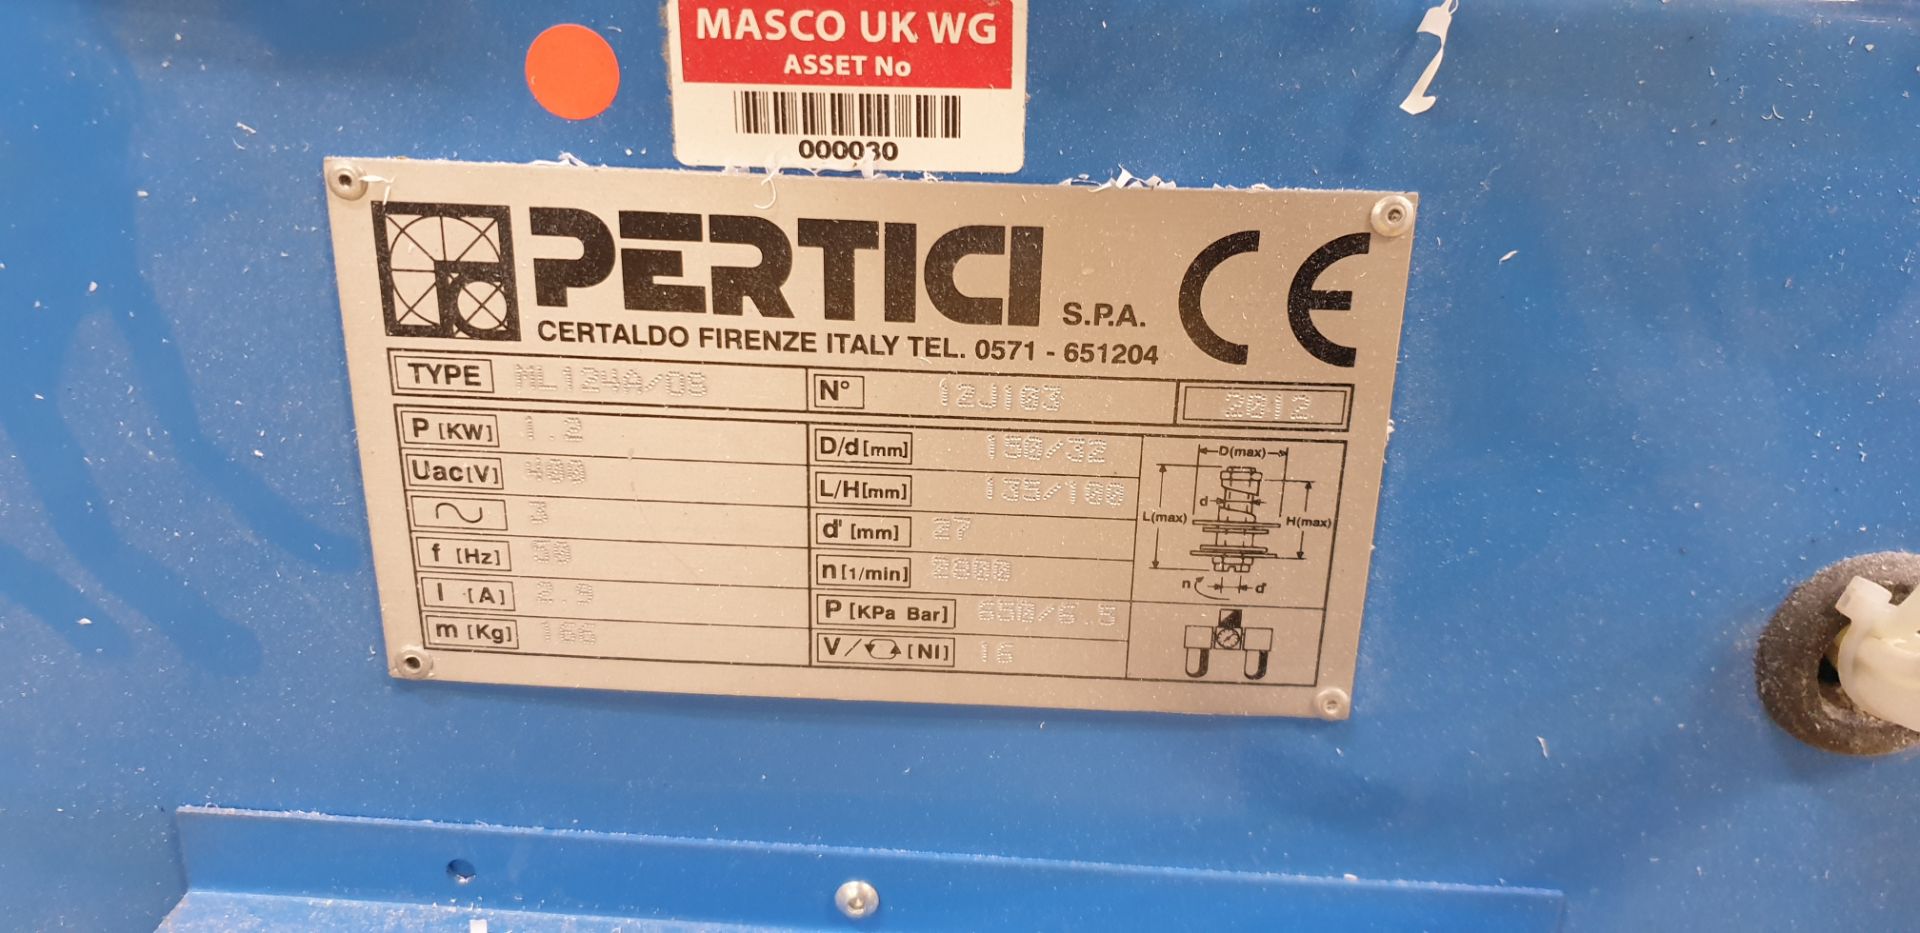 Pertici, Univer ML124/05, Copy Router , Serial Number: 12J103, Year of Manufacture: 2012 - Image 2 of 3